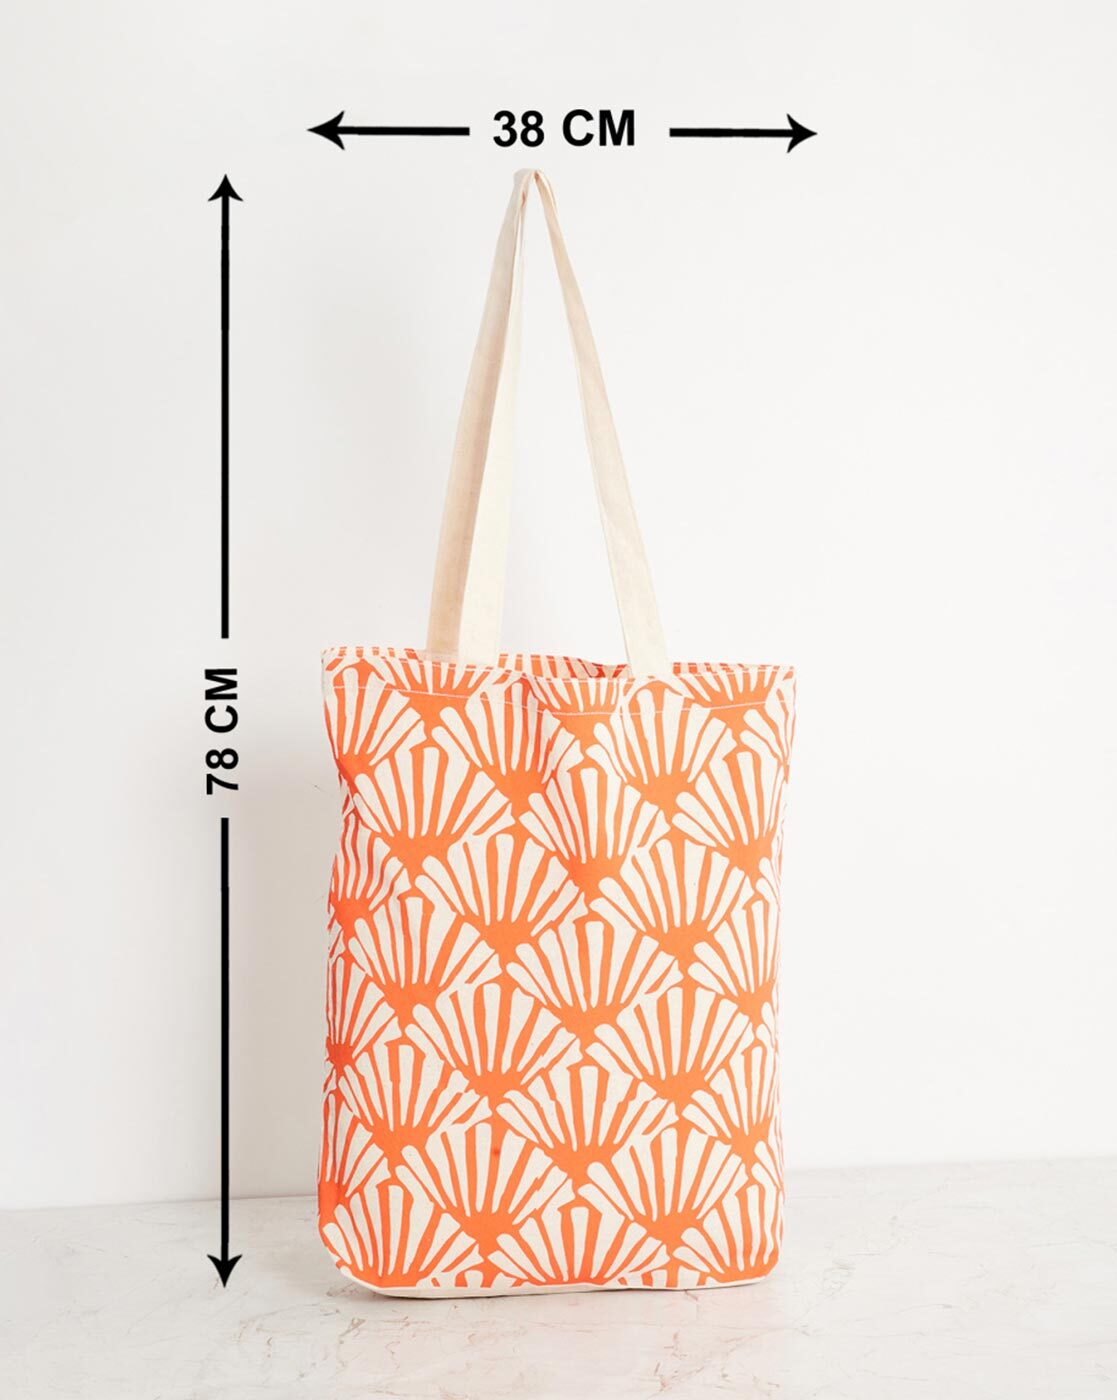 HOW TO PRINT A TOTE BAG AT HOME